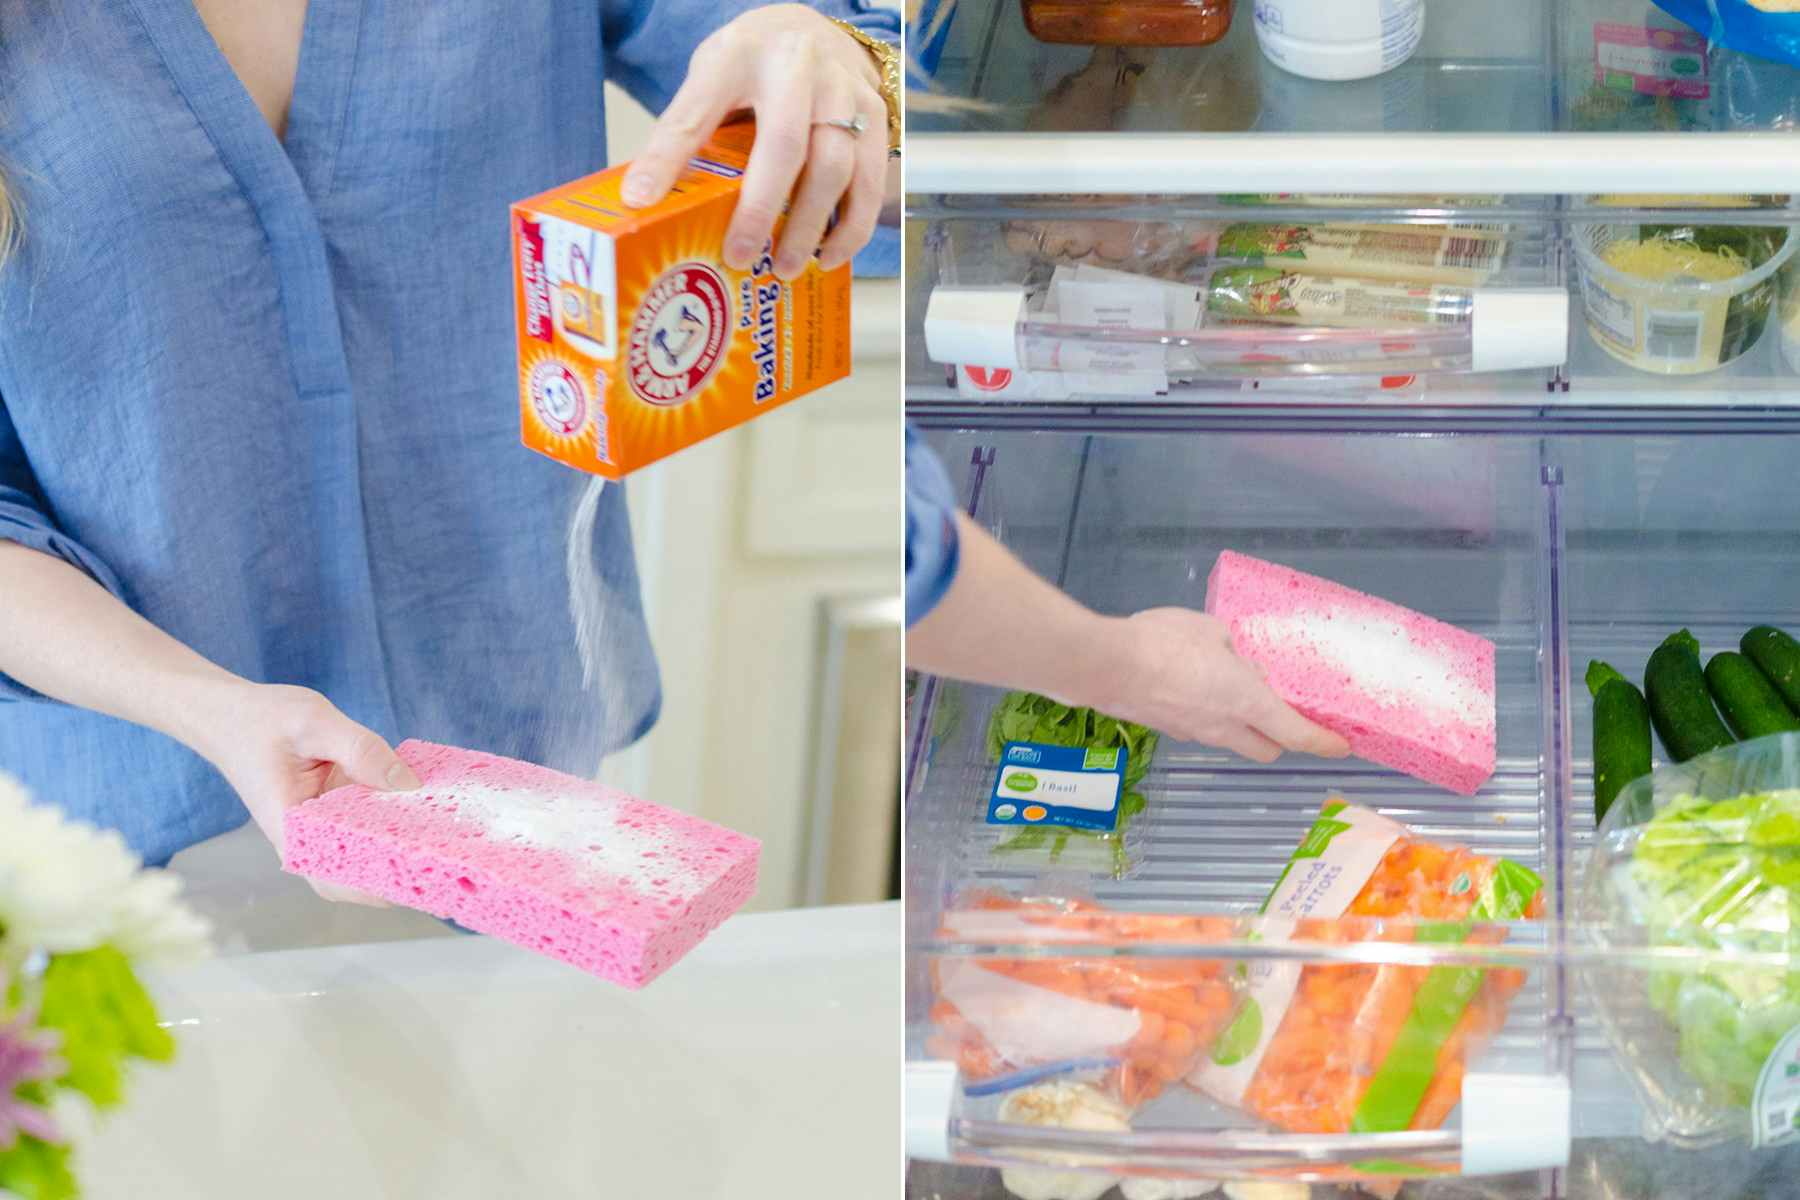 Use baking soda on a sponge to absorb smells in your fridge.